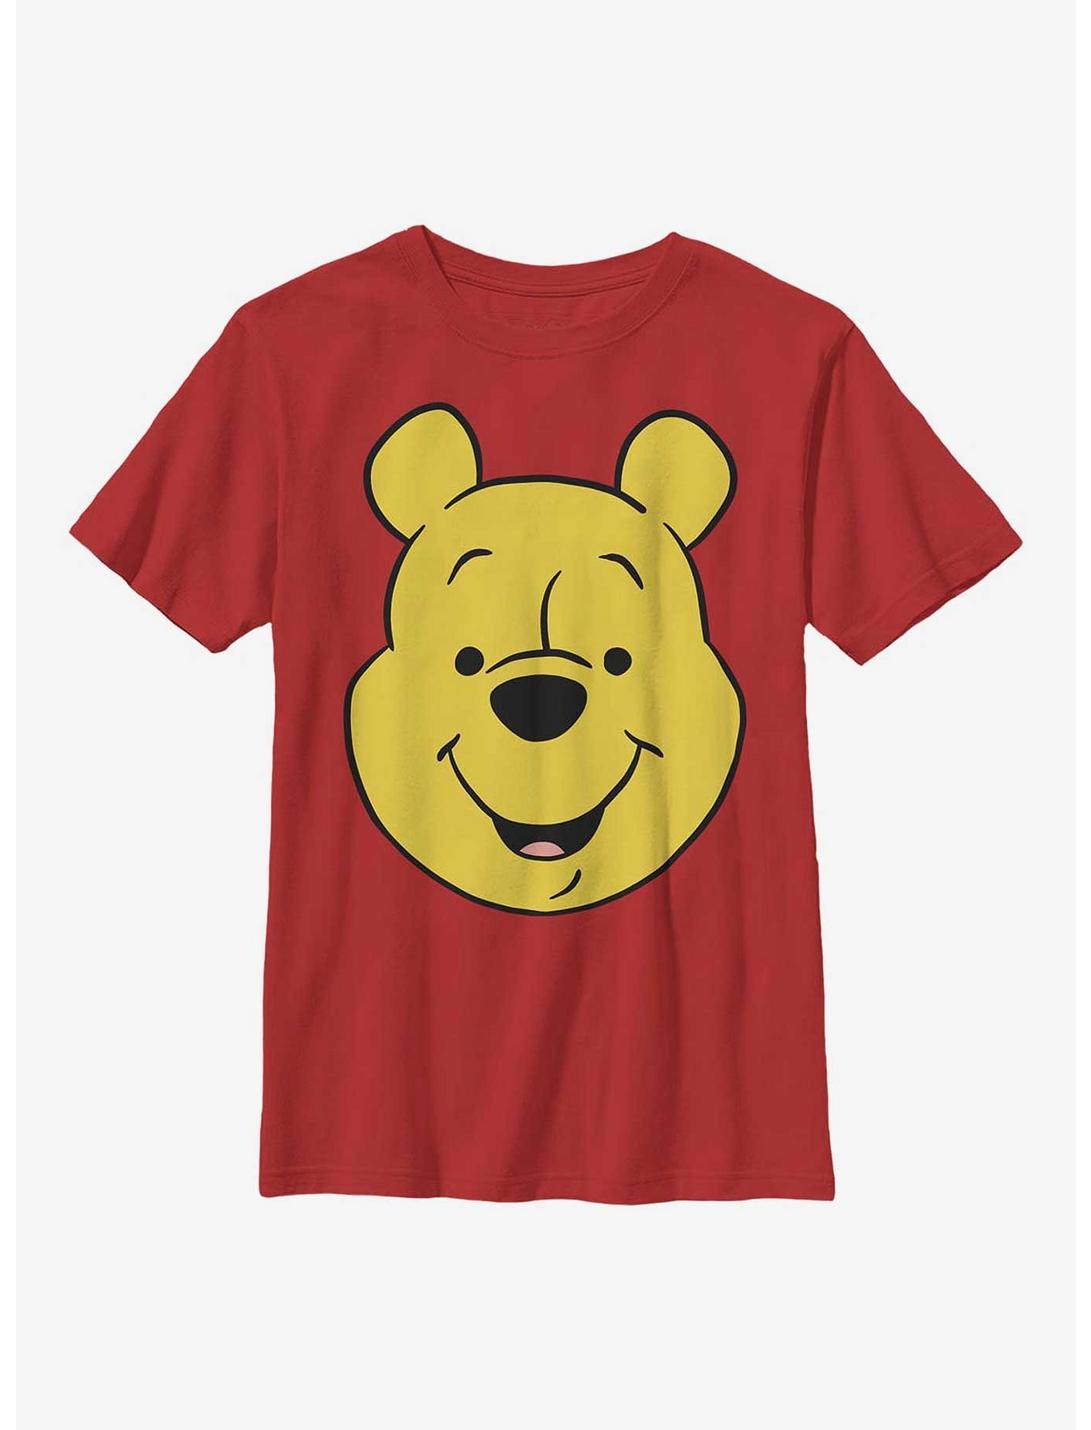 Disney Winnie The Pooh Big Face Pooh Youth T-Shirt, RED, hi-res